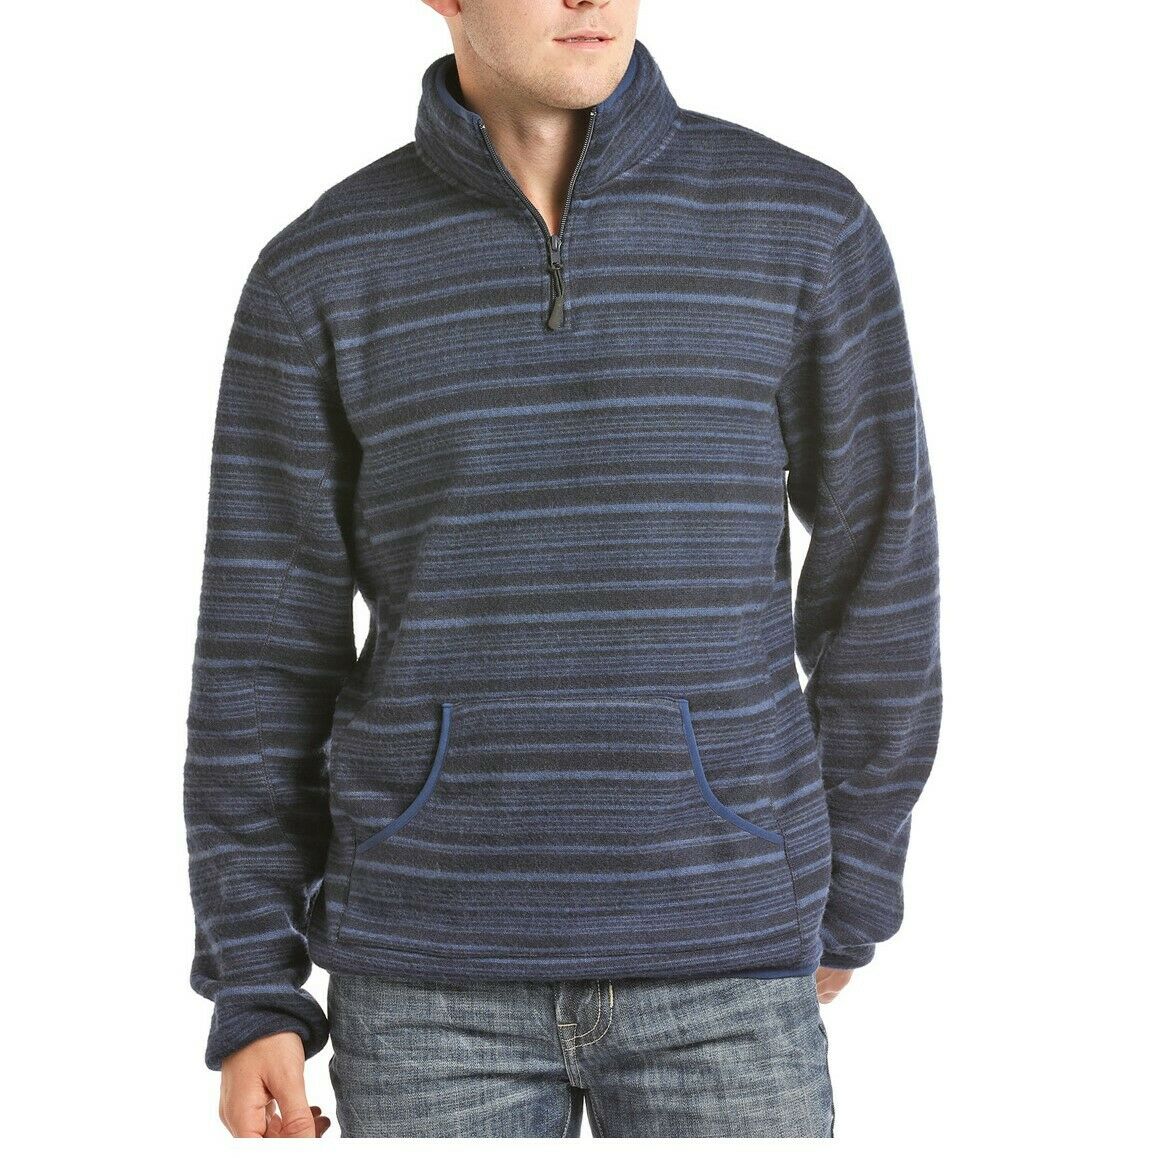 Powder River Outfitters Men's Blue Ombre Stripe Pullover 91-7838-45